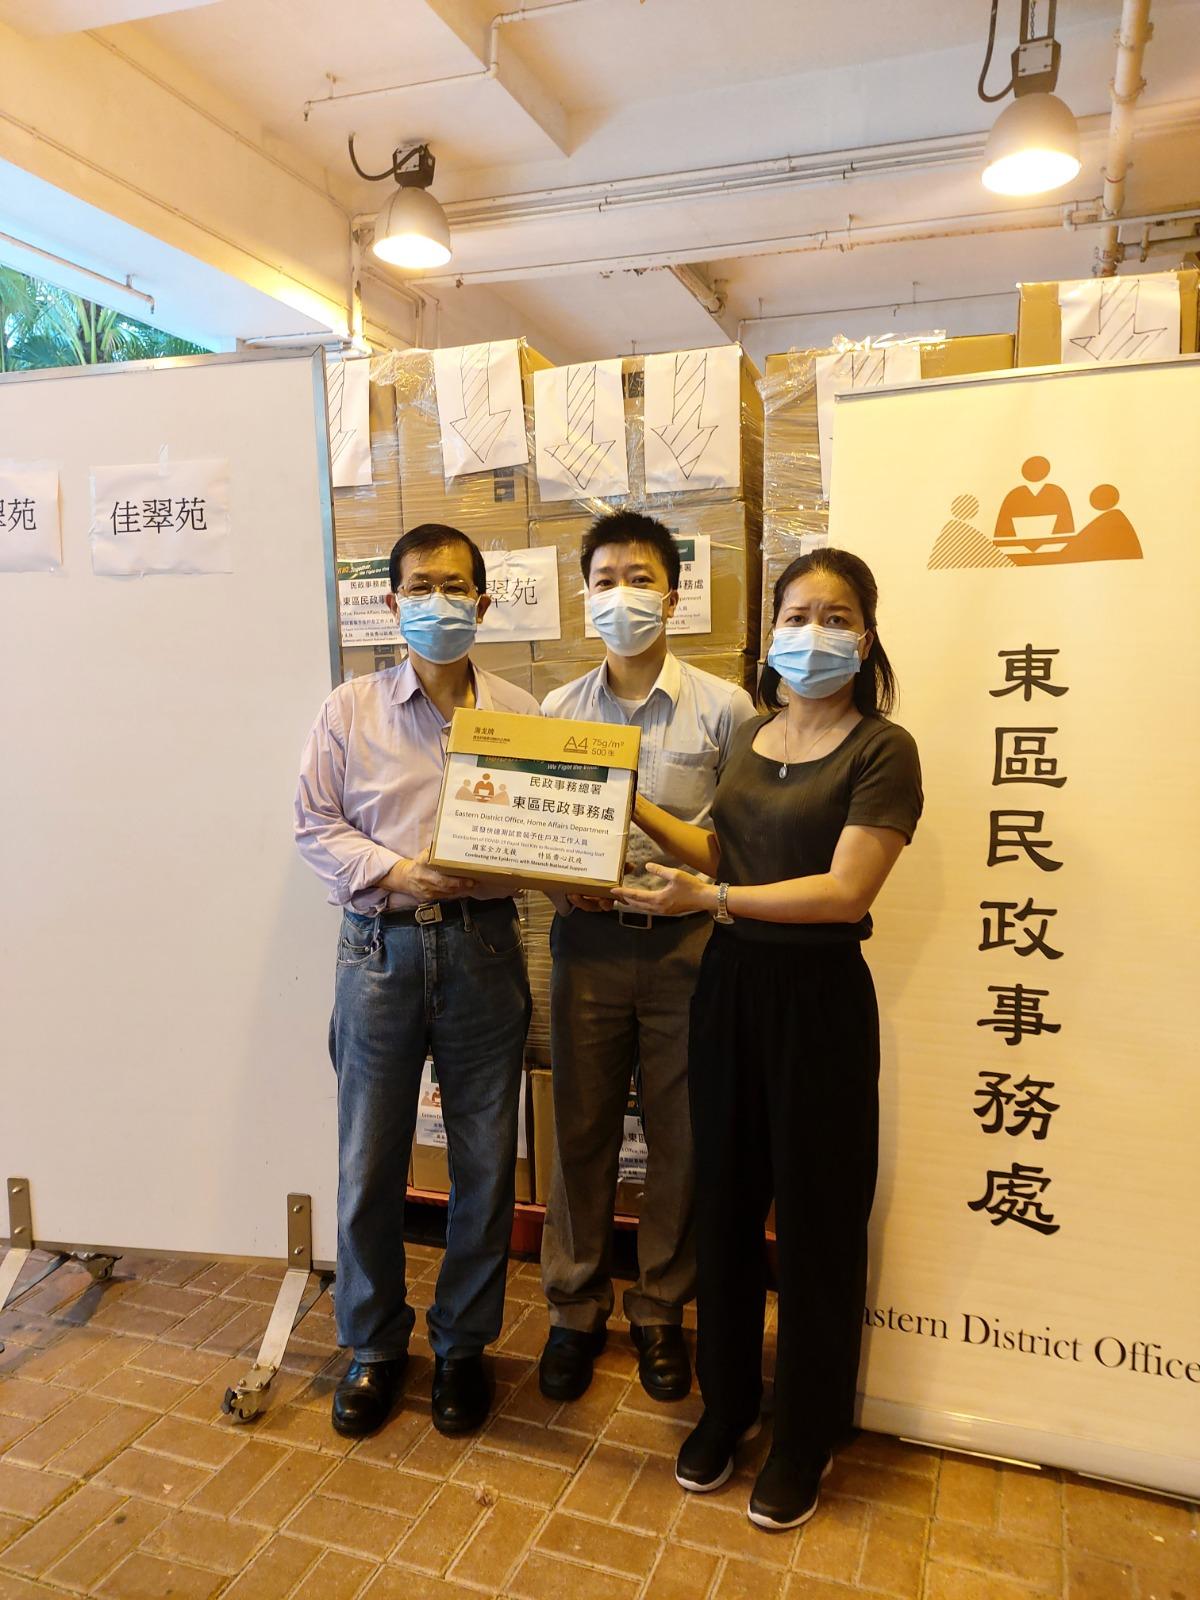 The Eastern District Office today (May 15) distributed COVID-19 rapid test kits to households, cleansing workers and property management staff living and working in Kai Tsui Court for voluntary testing through the property management company.